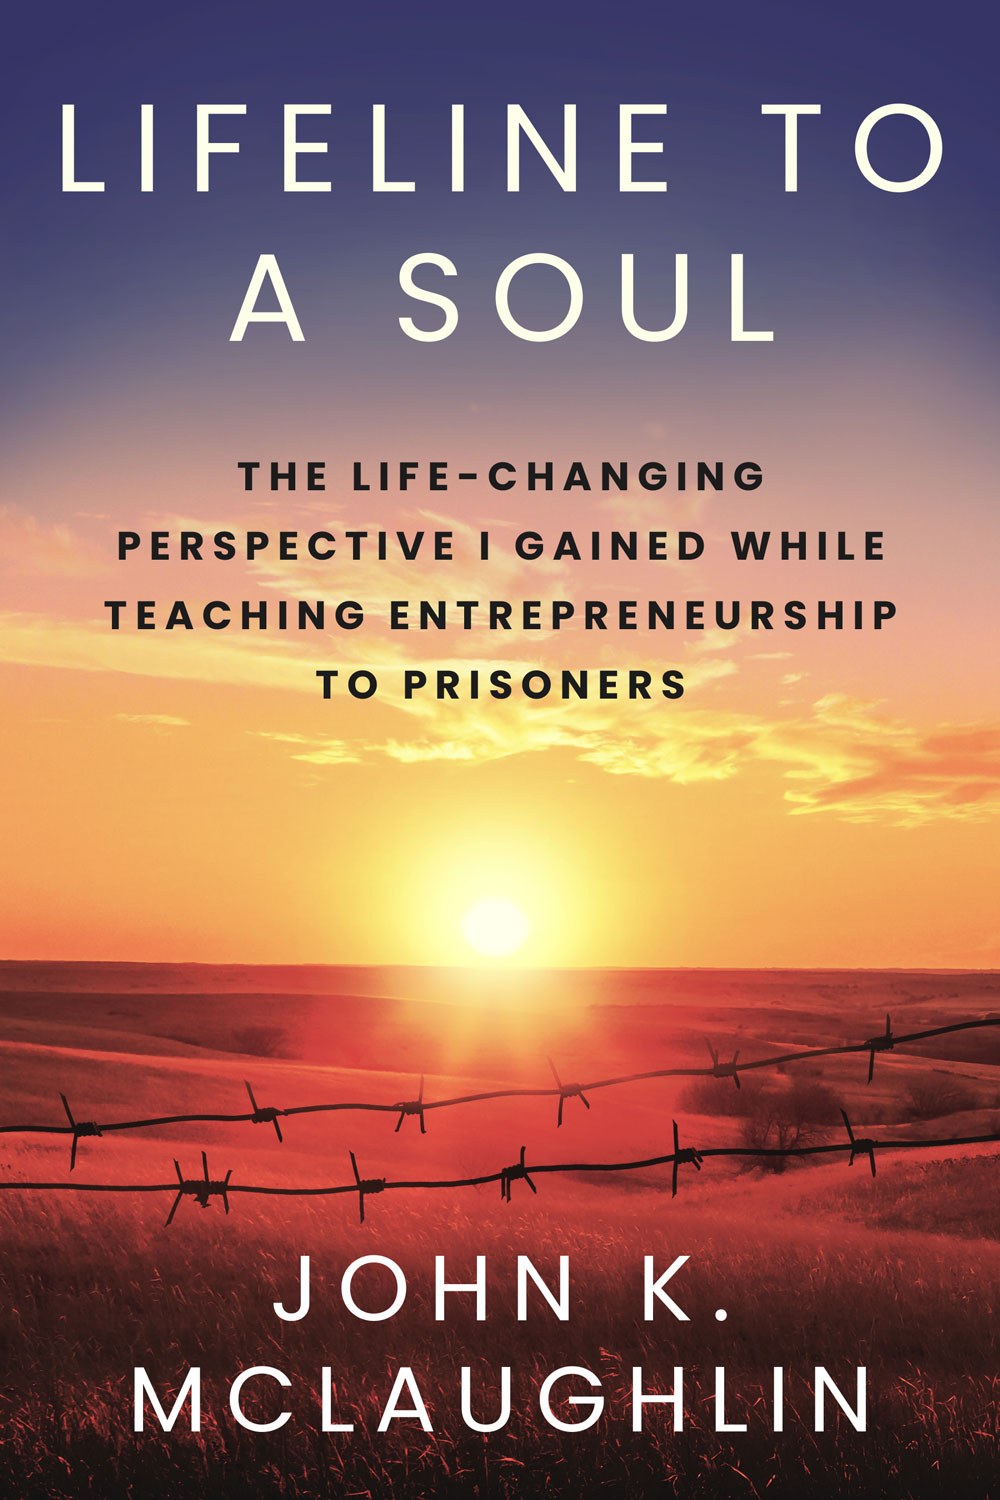 Lifeline to a Soul - book cover